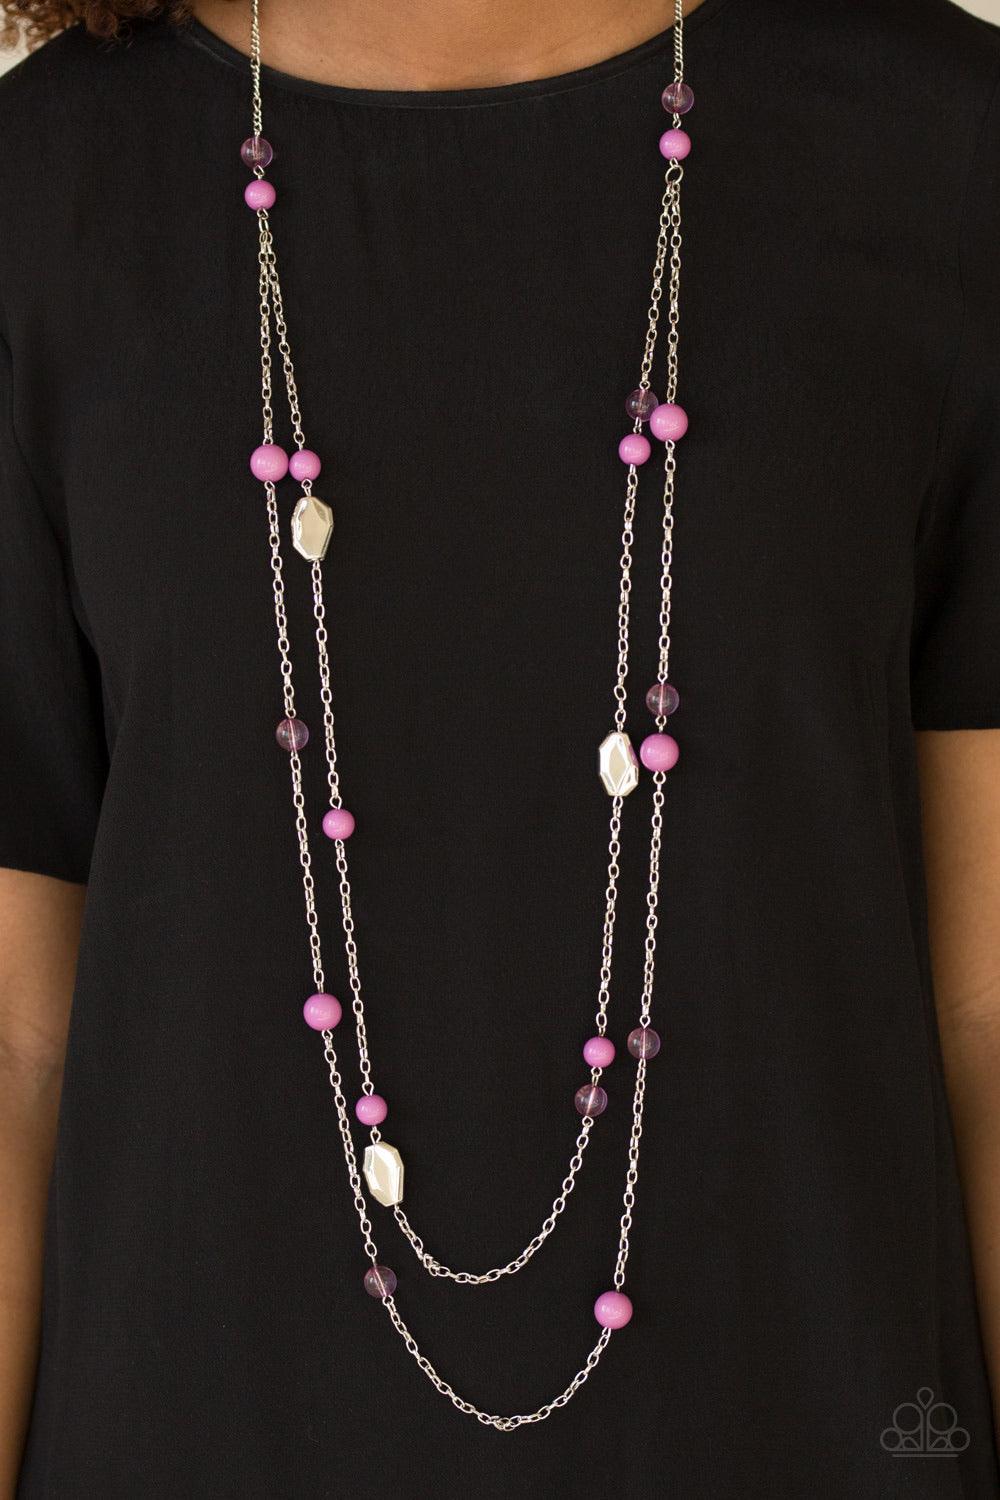 Paparazzi Accessories Hitting a Glow Point - Purple Featuring faceted silver accents, glassy and polished purple beads trickle along strands of shimmery silver chains for a seasonal look. Features an adjustable clasp closure. Jewelry